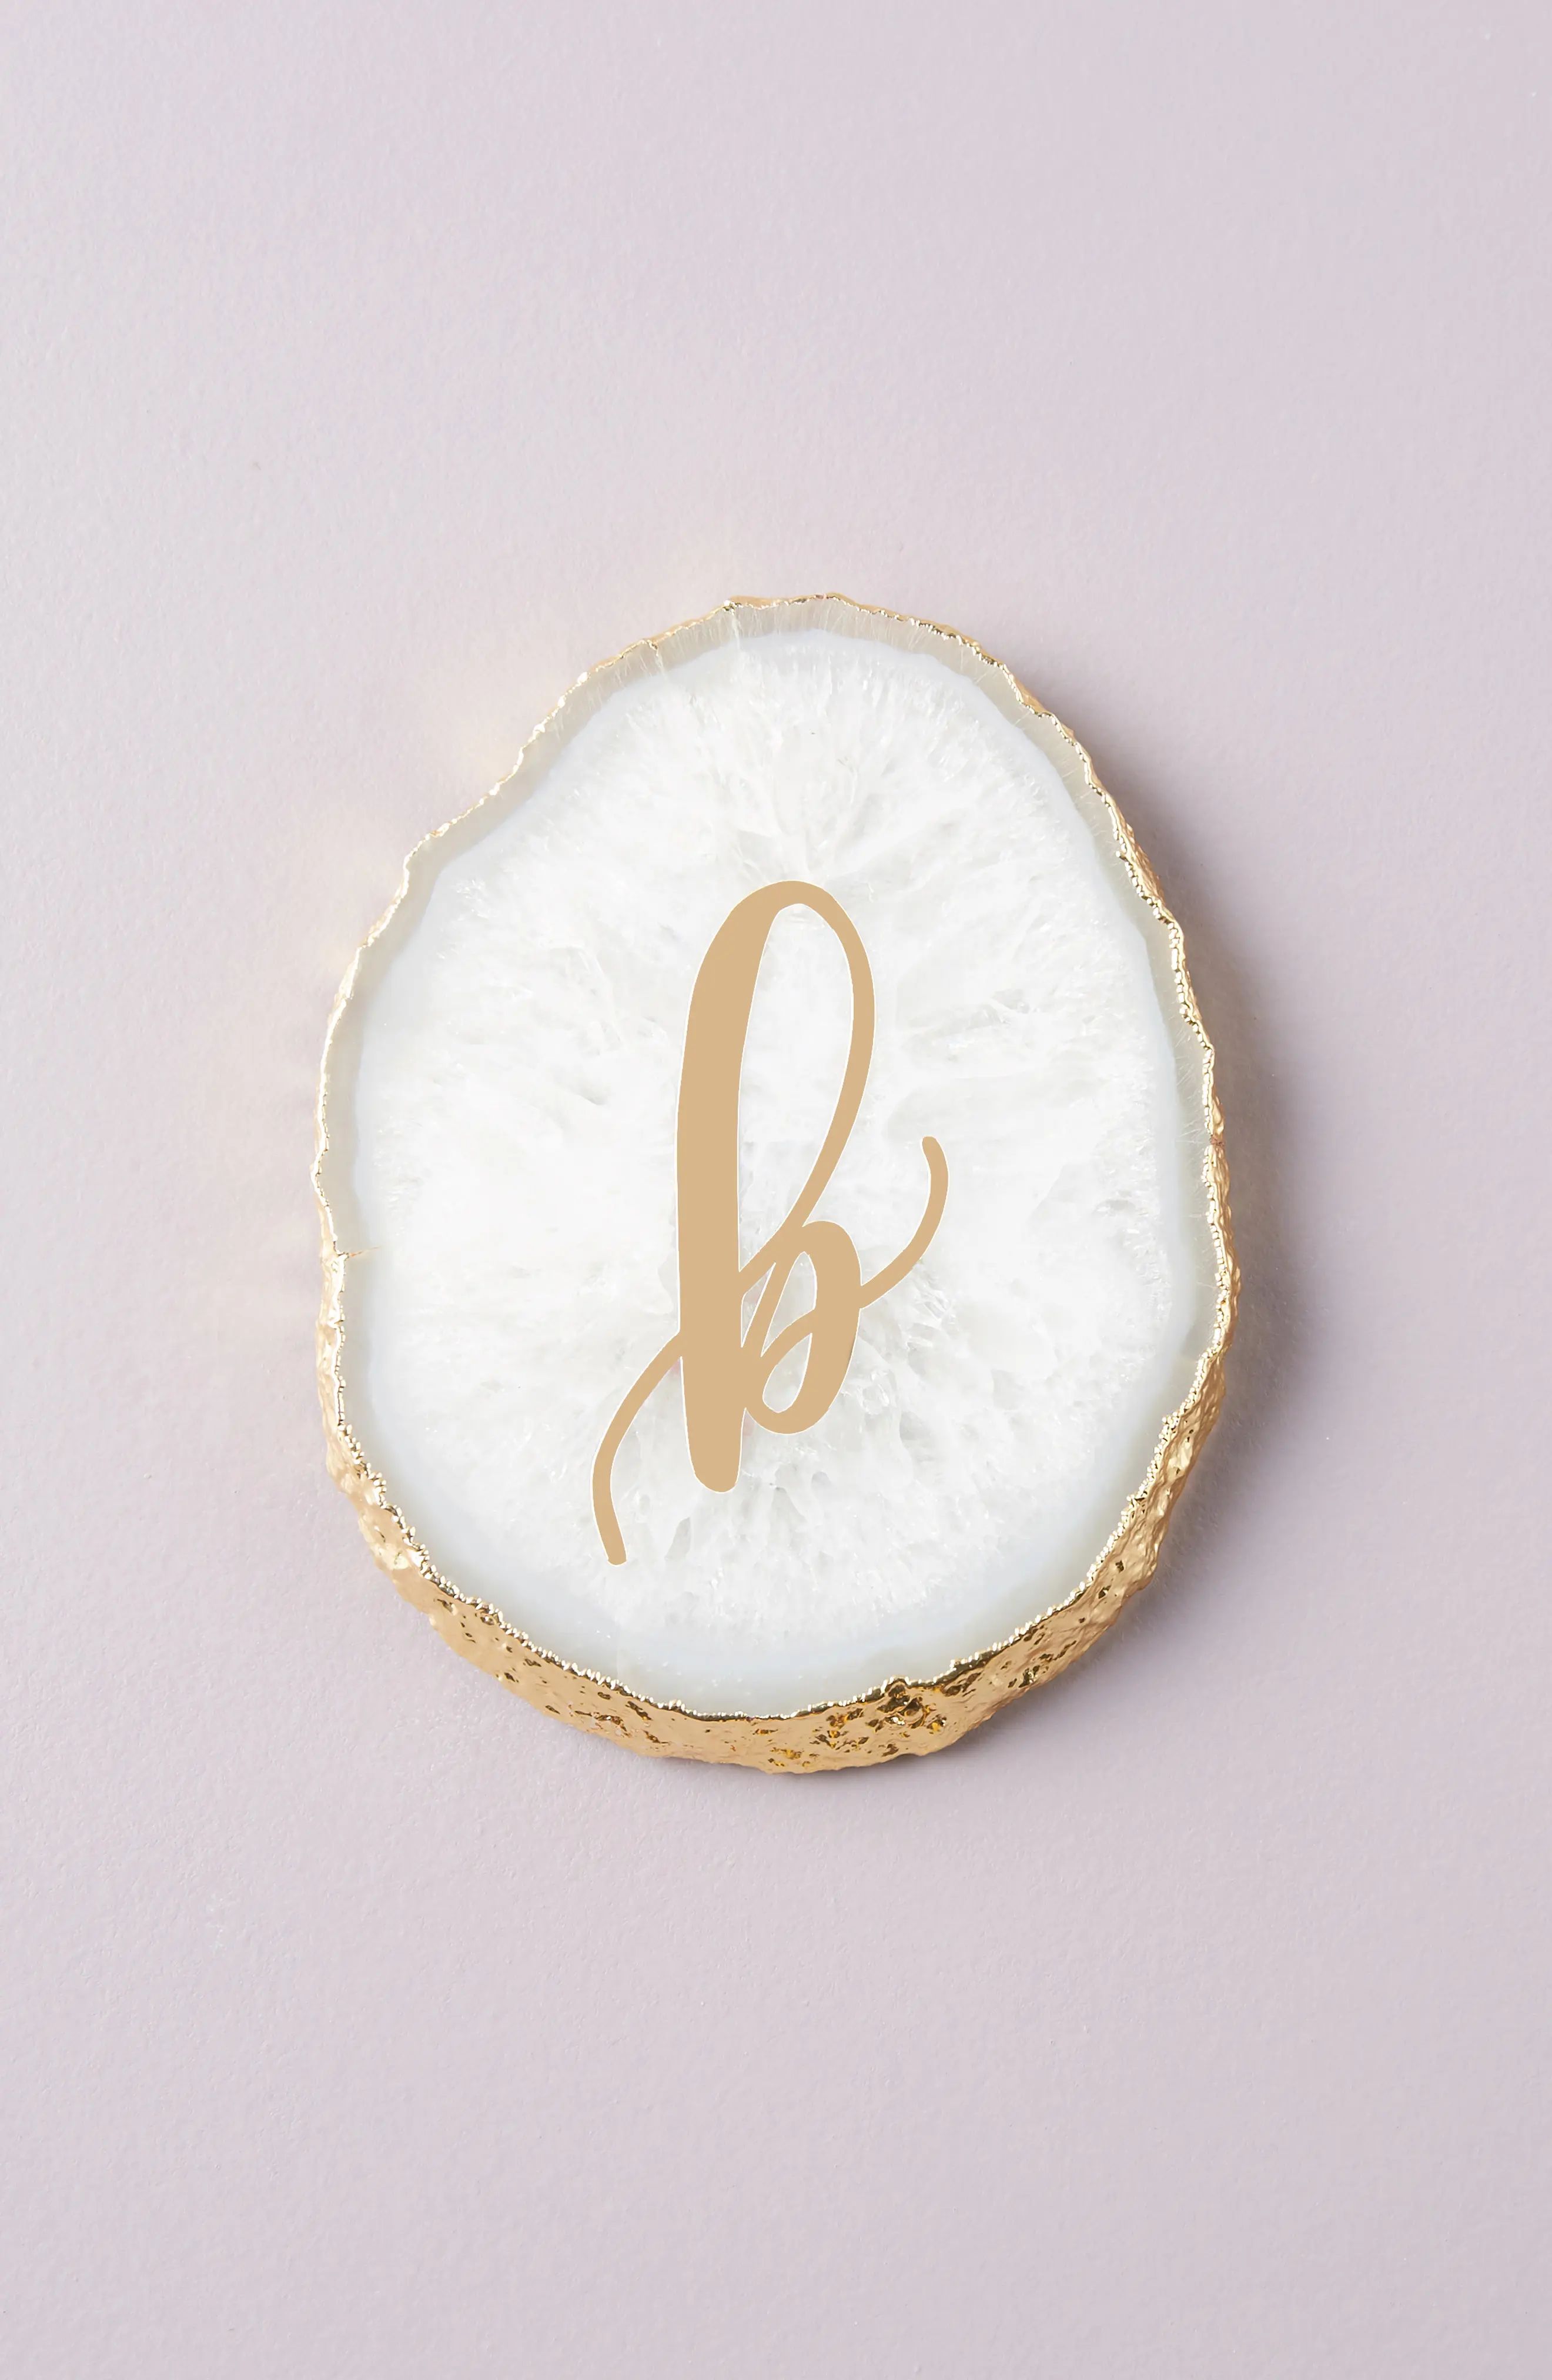 Anthropologie Home Monogram Agate Coaster, Size One Size - White | Nordstrom